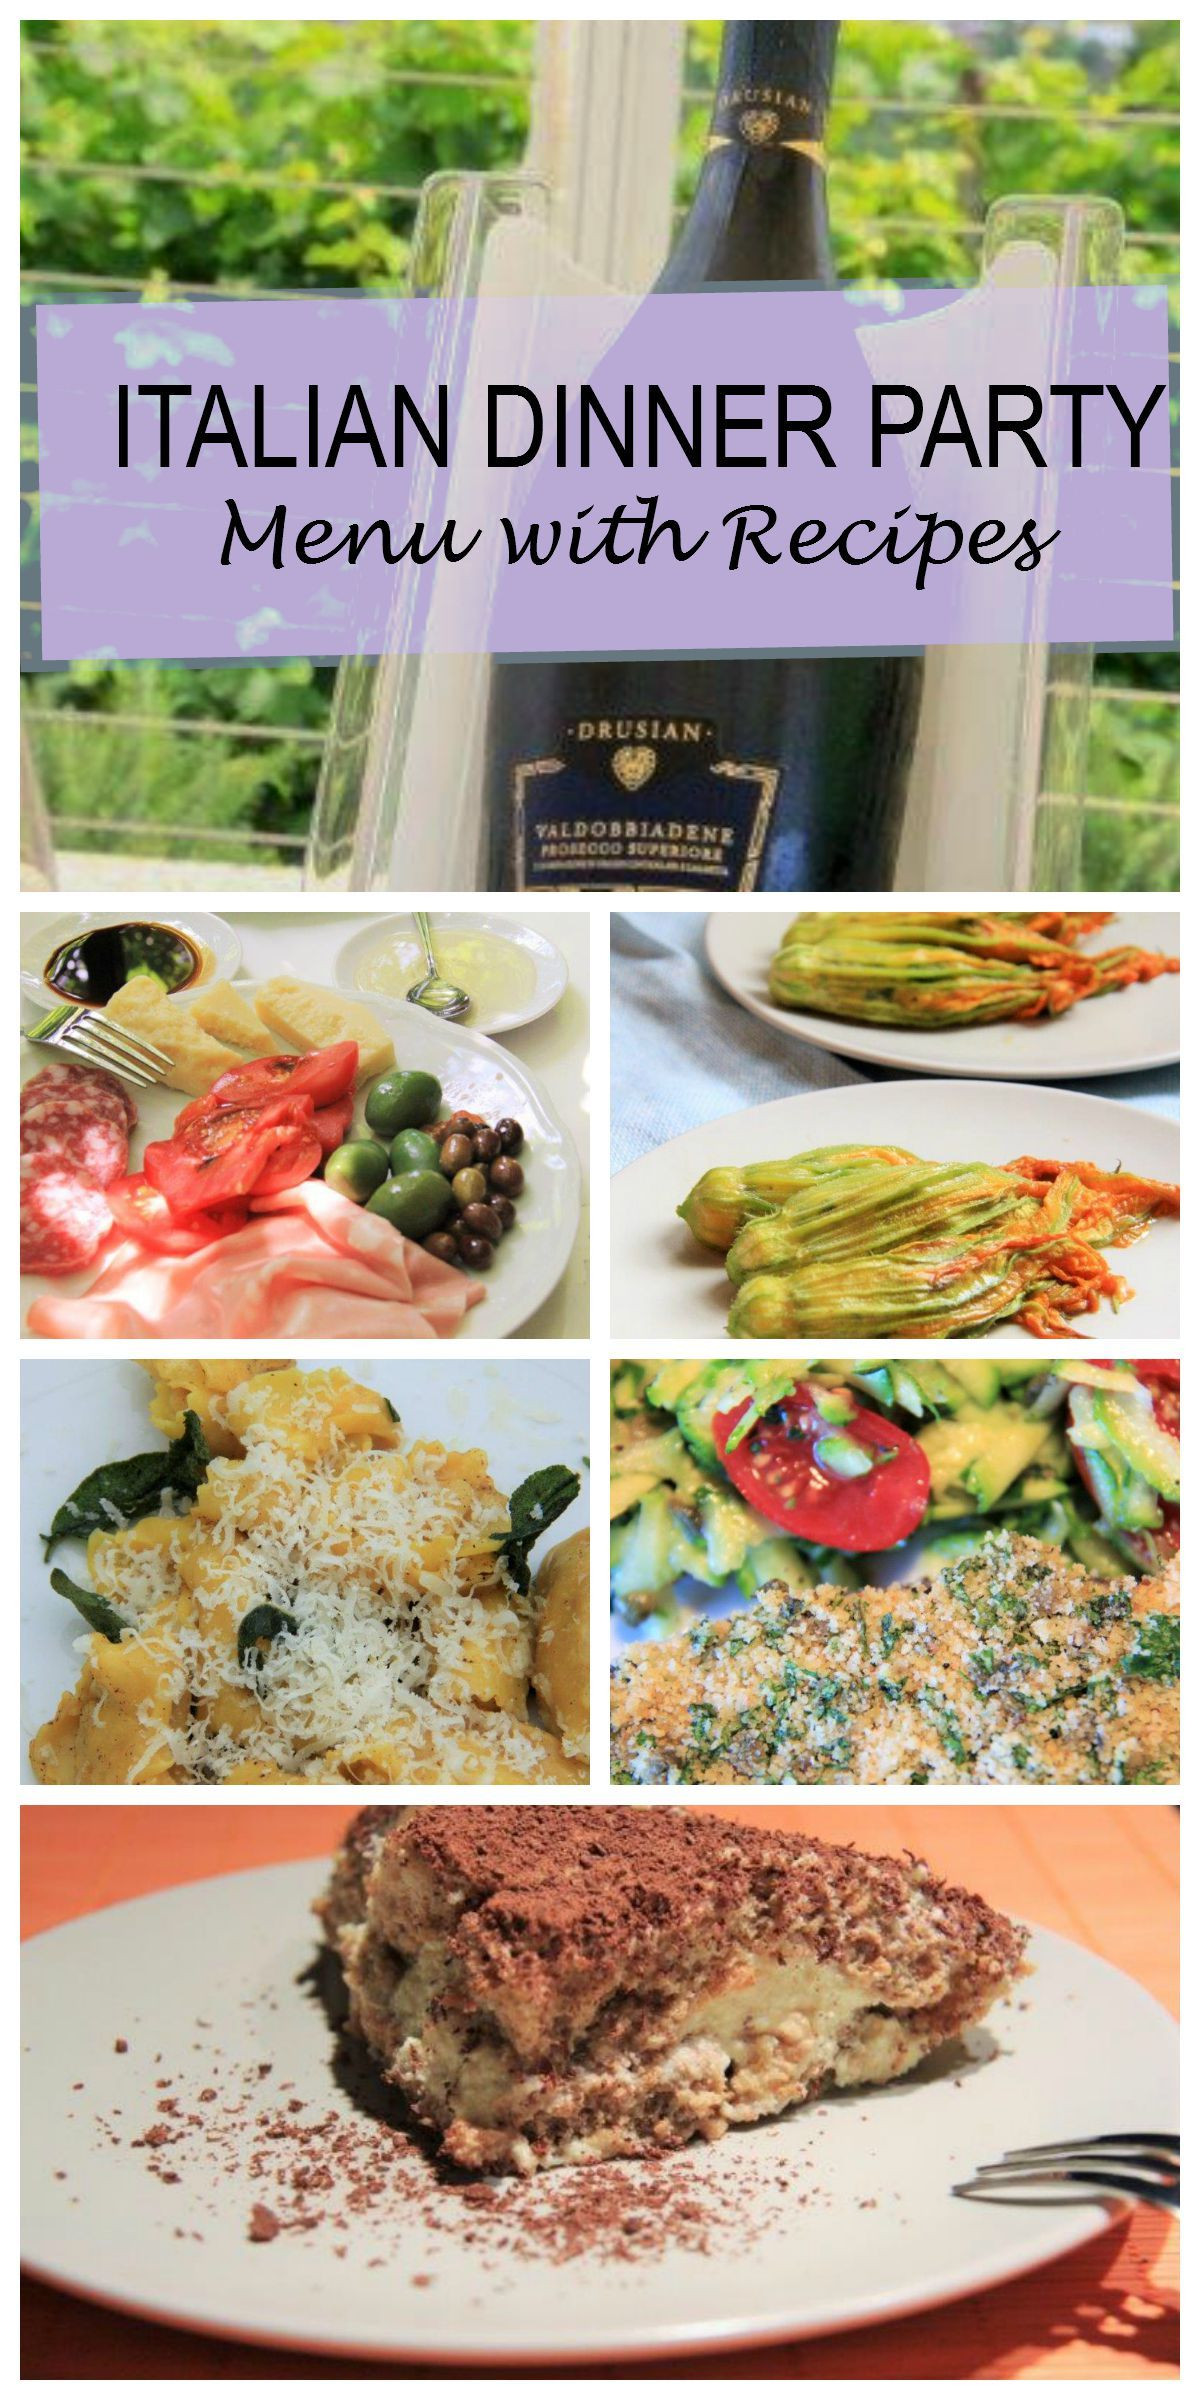 Italian Menu Ideas For Dinner Party
 Italian Dinner Party Menu plete with Recipes for Easy